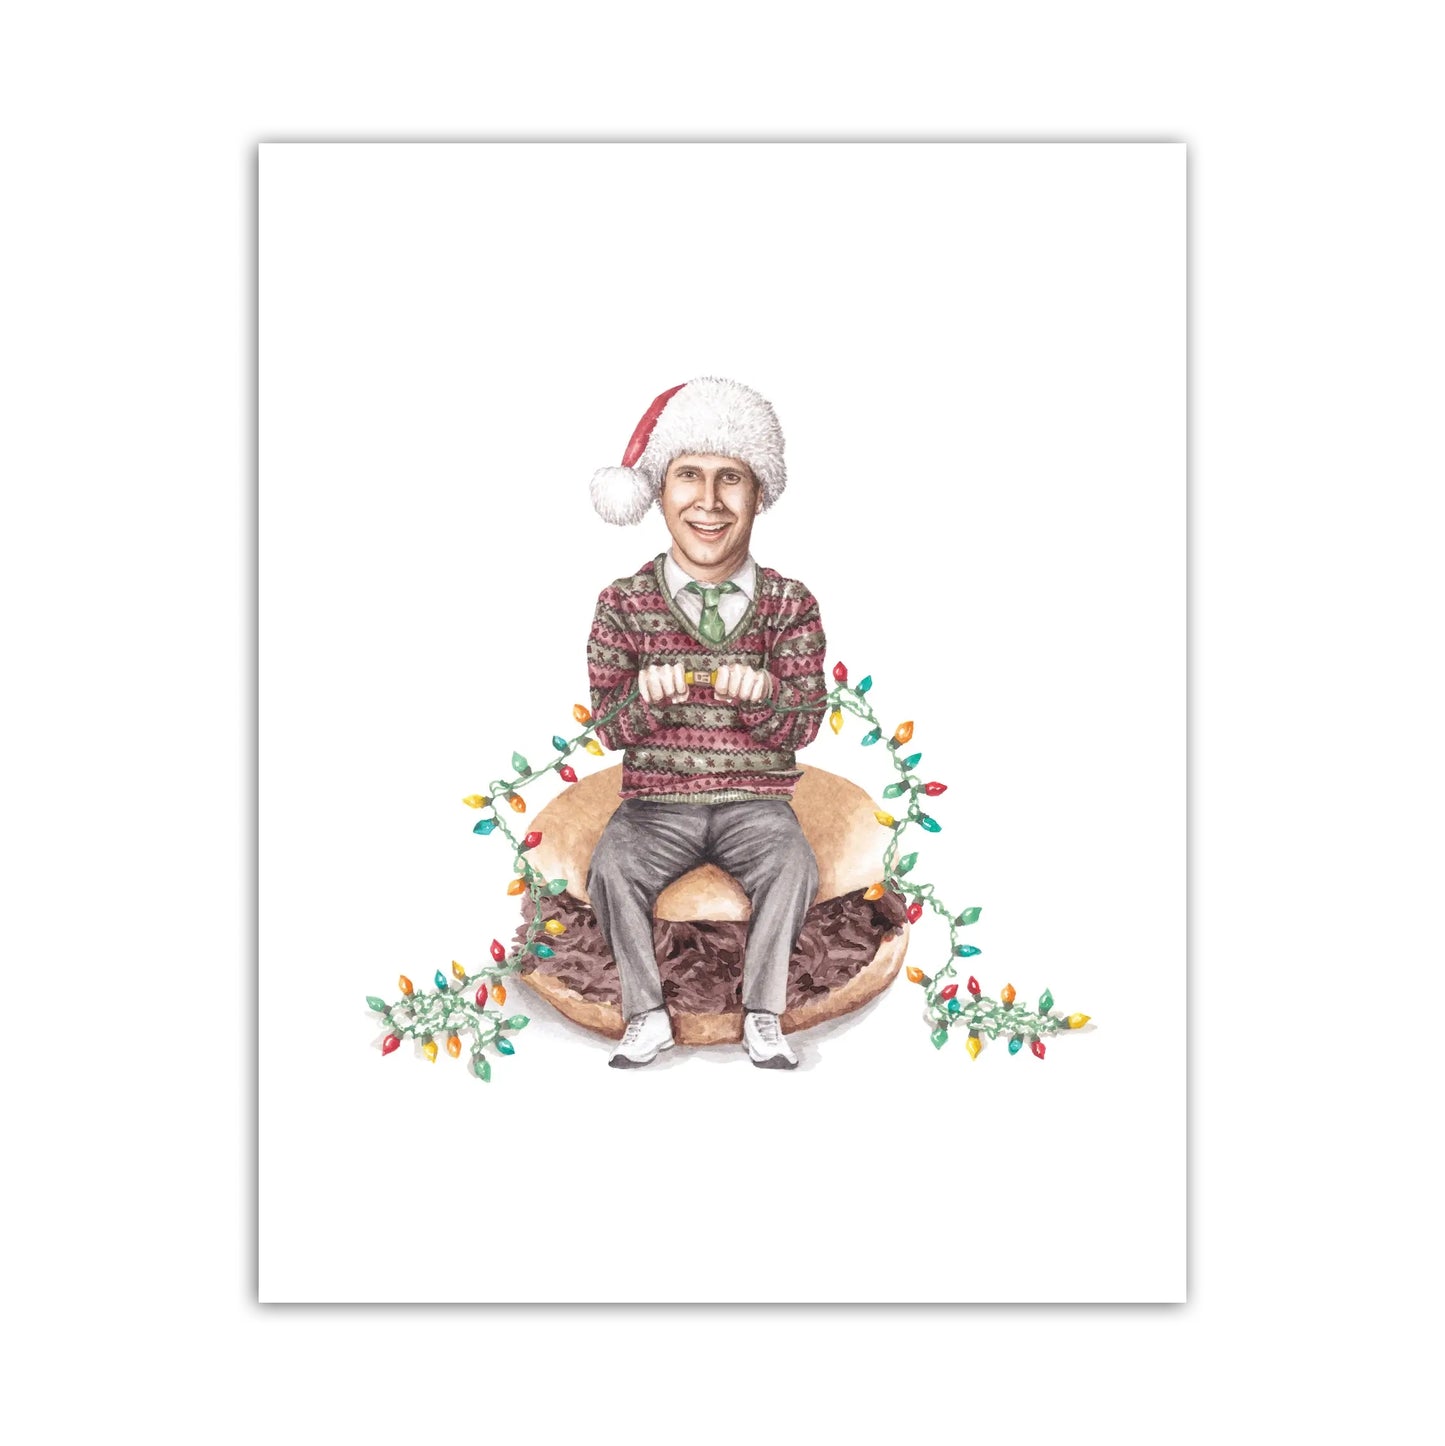 Clark Griswold on Roast Beef 8" x 10" Archival Print